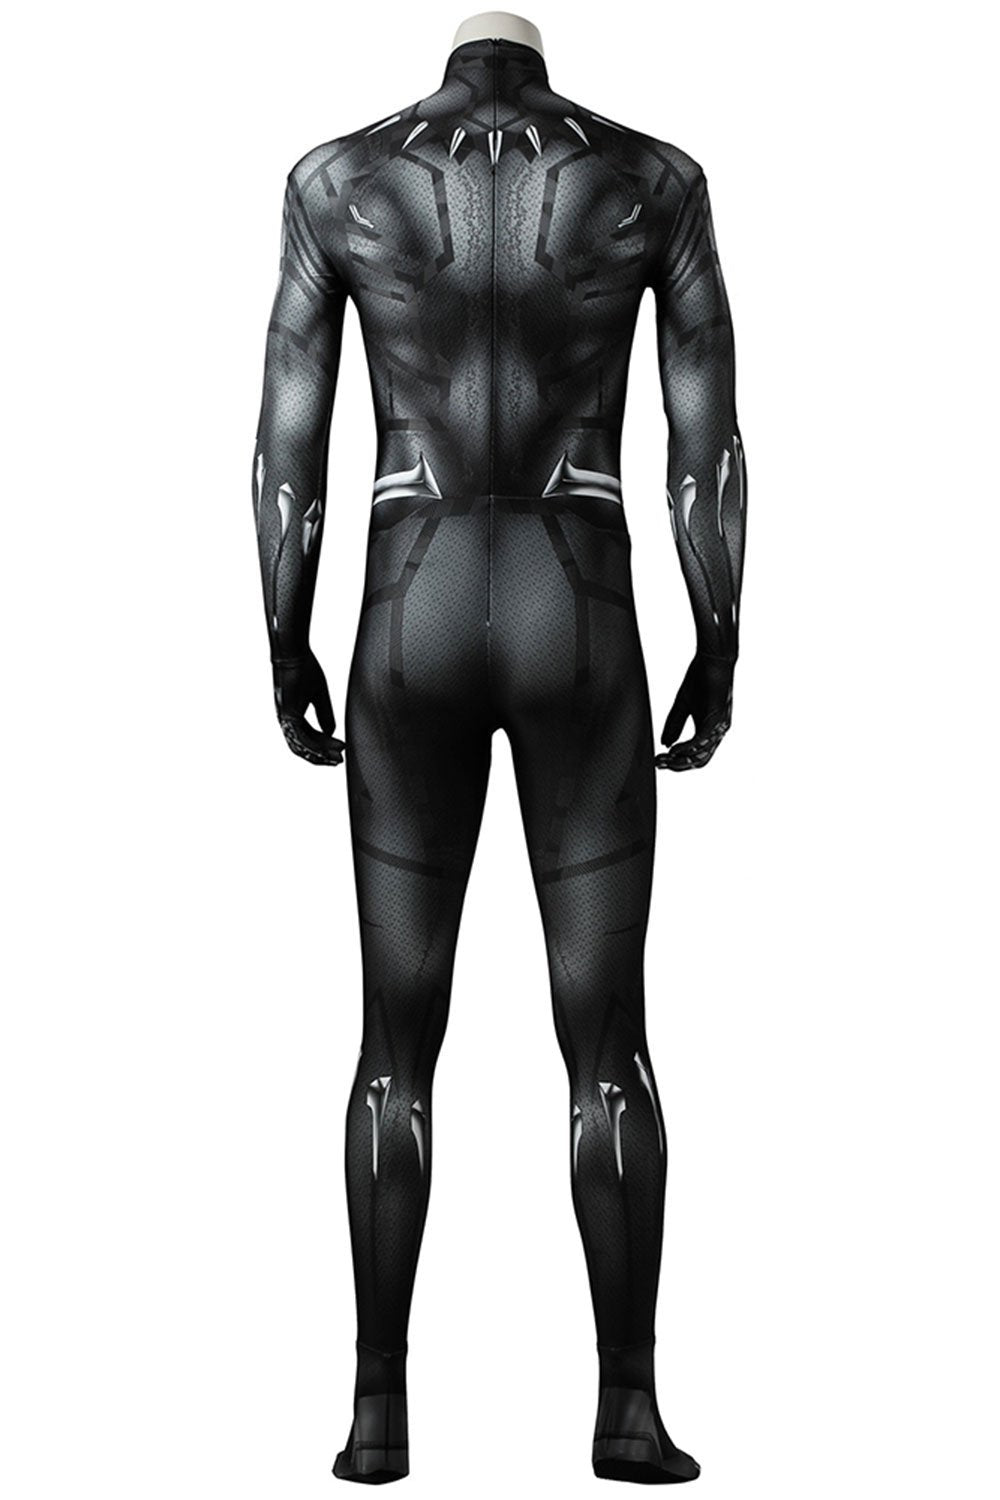 Avengers Black Panther/Panthère noire T'Challa 3D Cosplay Costume –